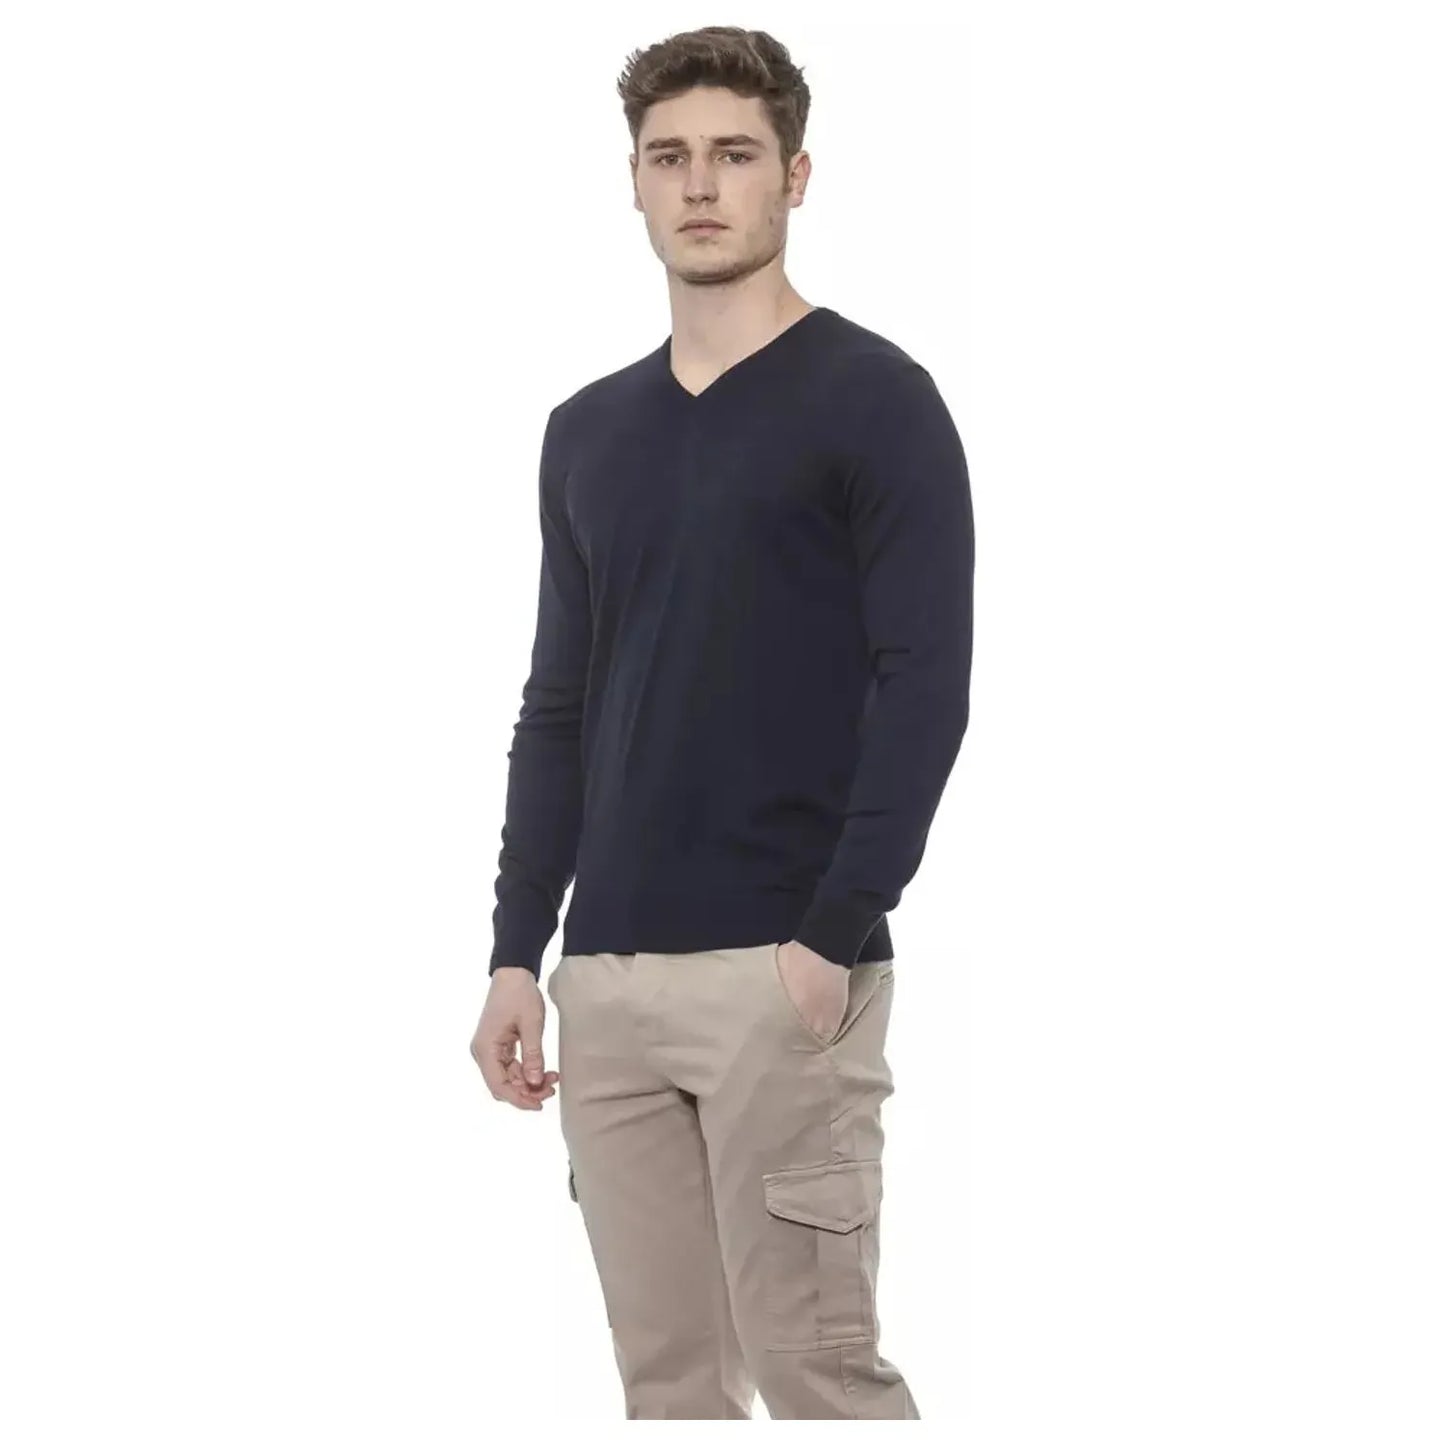 Conte of Florence Elegant V-Neck Cotton Sweater for Men prussianblue-sweater-1 stock_product_image_20335_51871288-19-1121c194-934.webp